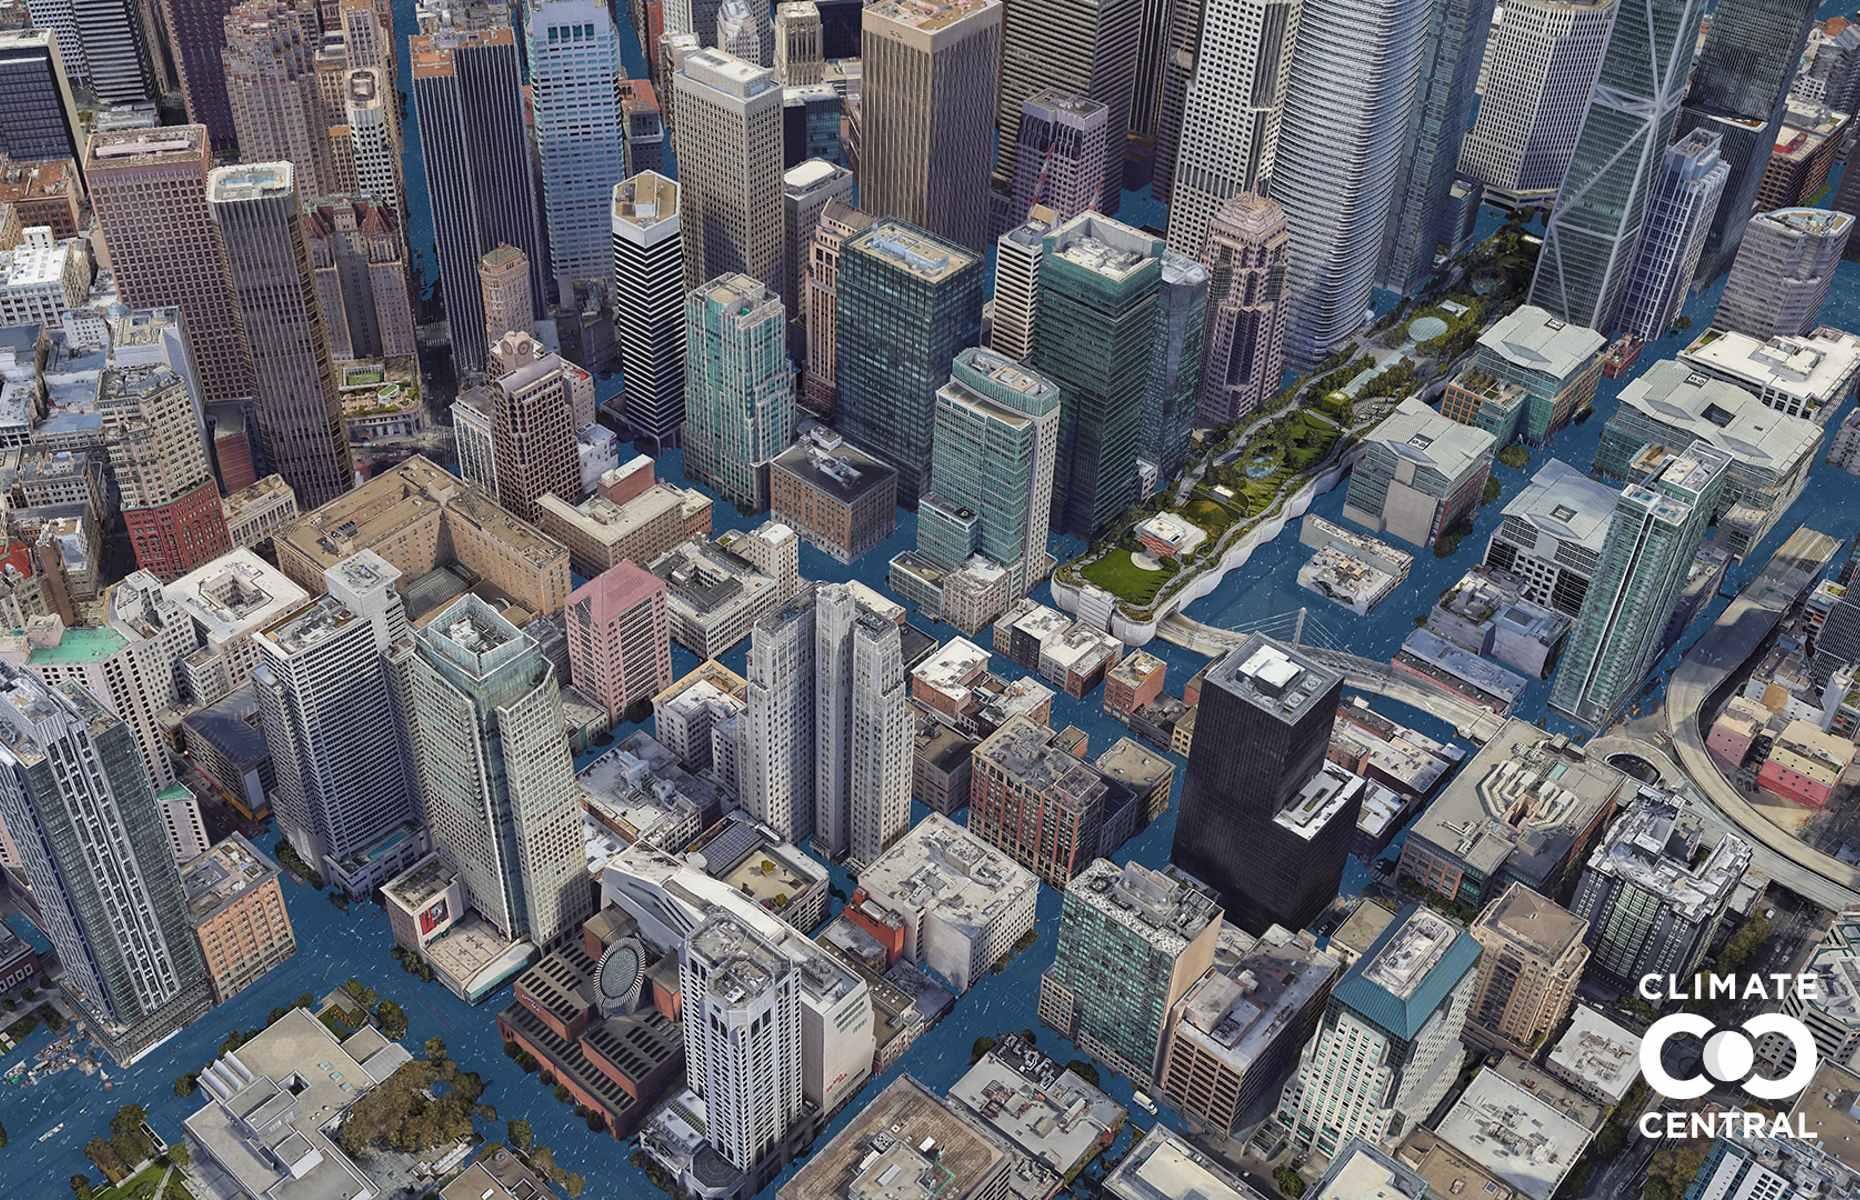 Significant chunks of the Windy City, which sits on a peninsula jutting out into the North Pacific Ocean, would be underwater in the event of unchecked global warming. In this photo modelling of what San Francisco's downtown would look like, smaller skyscrapers and buildings are almost swallowed up by the sea.